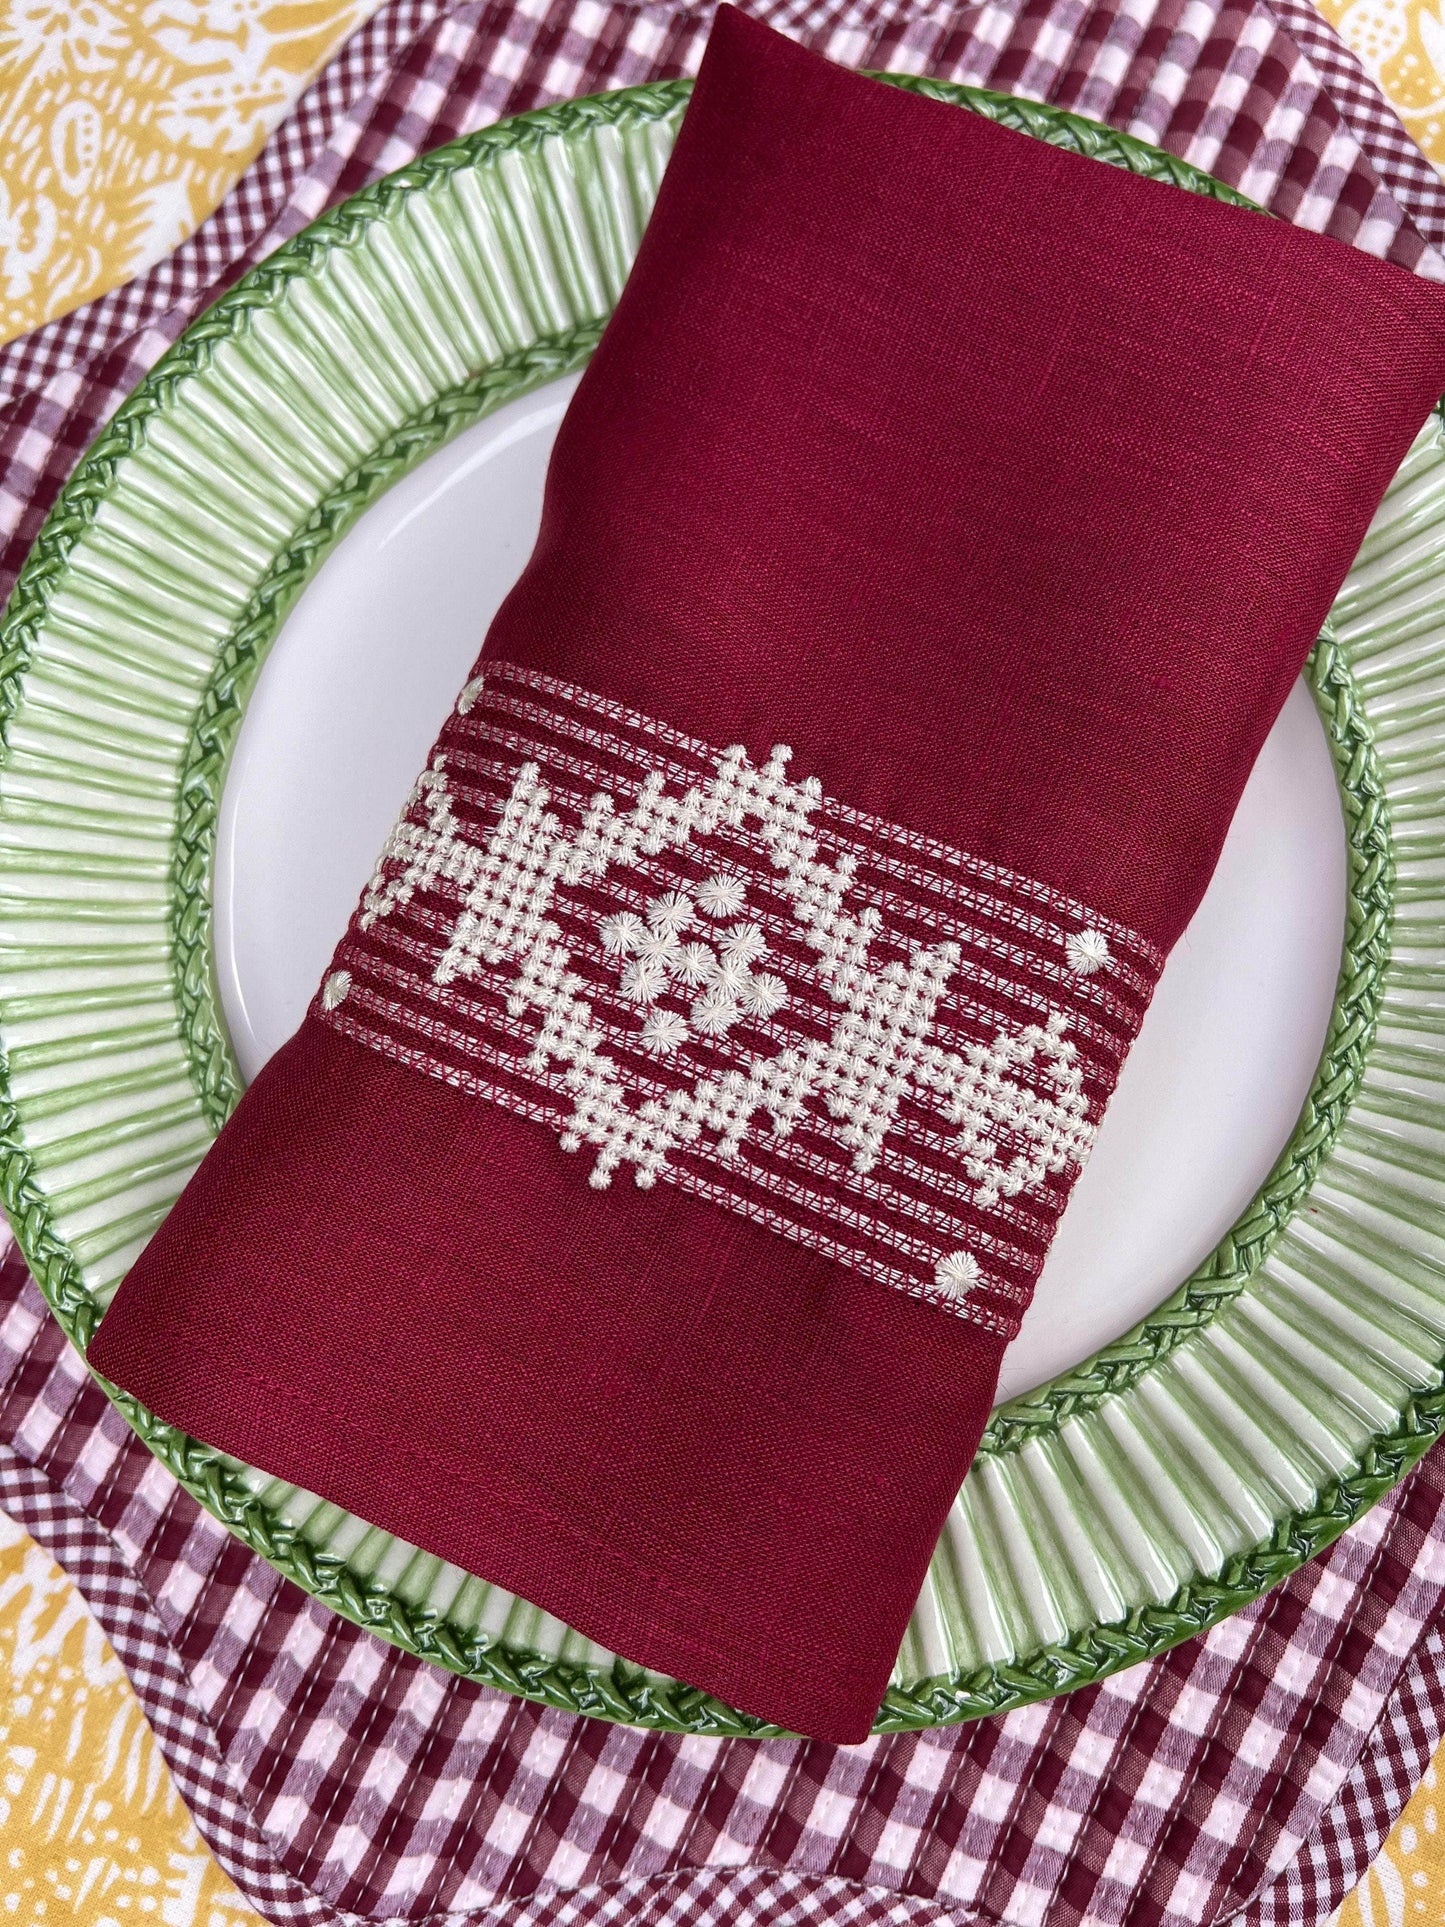 The Gingham Scallop Placemat - Burgundy And Navy